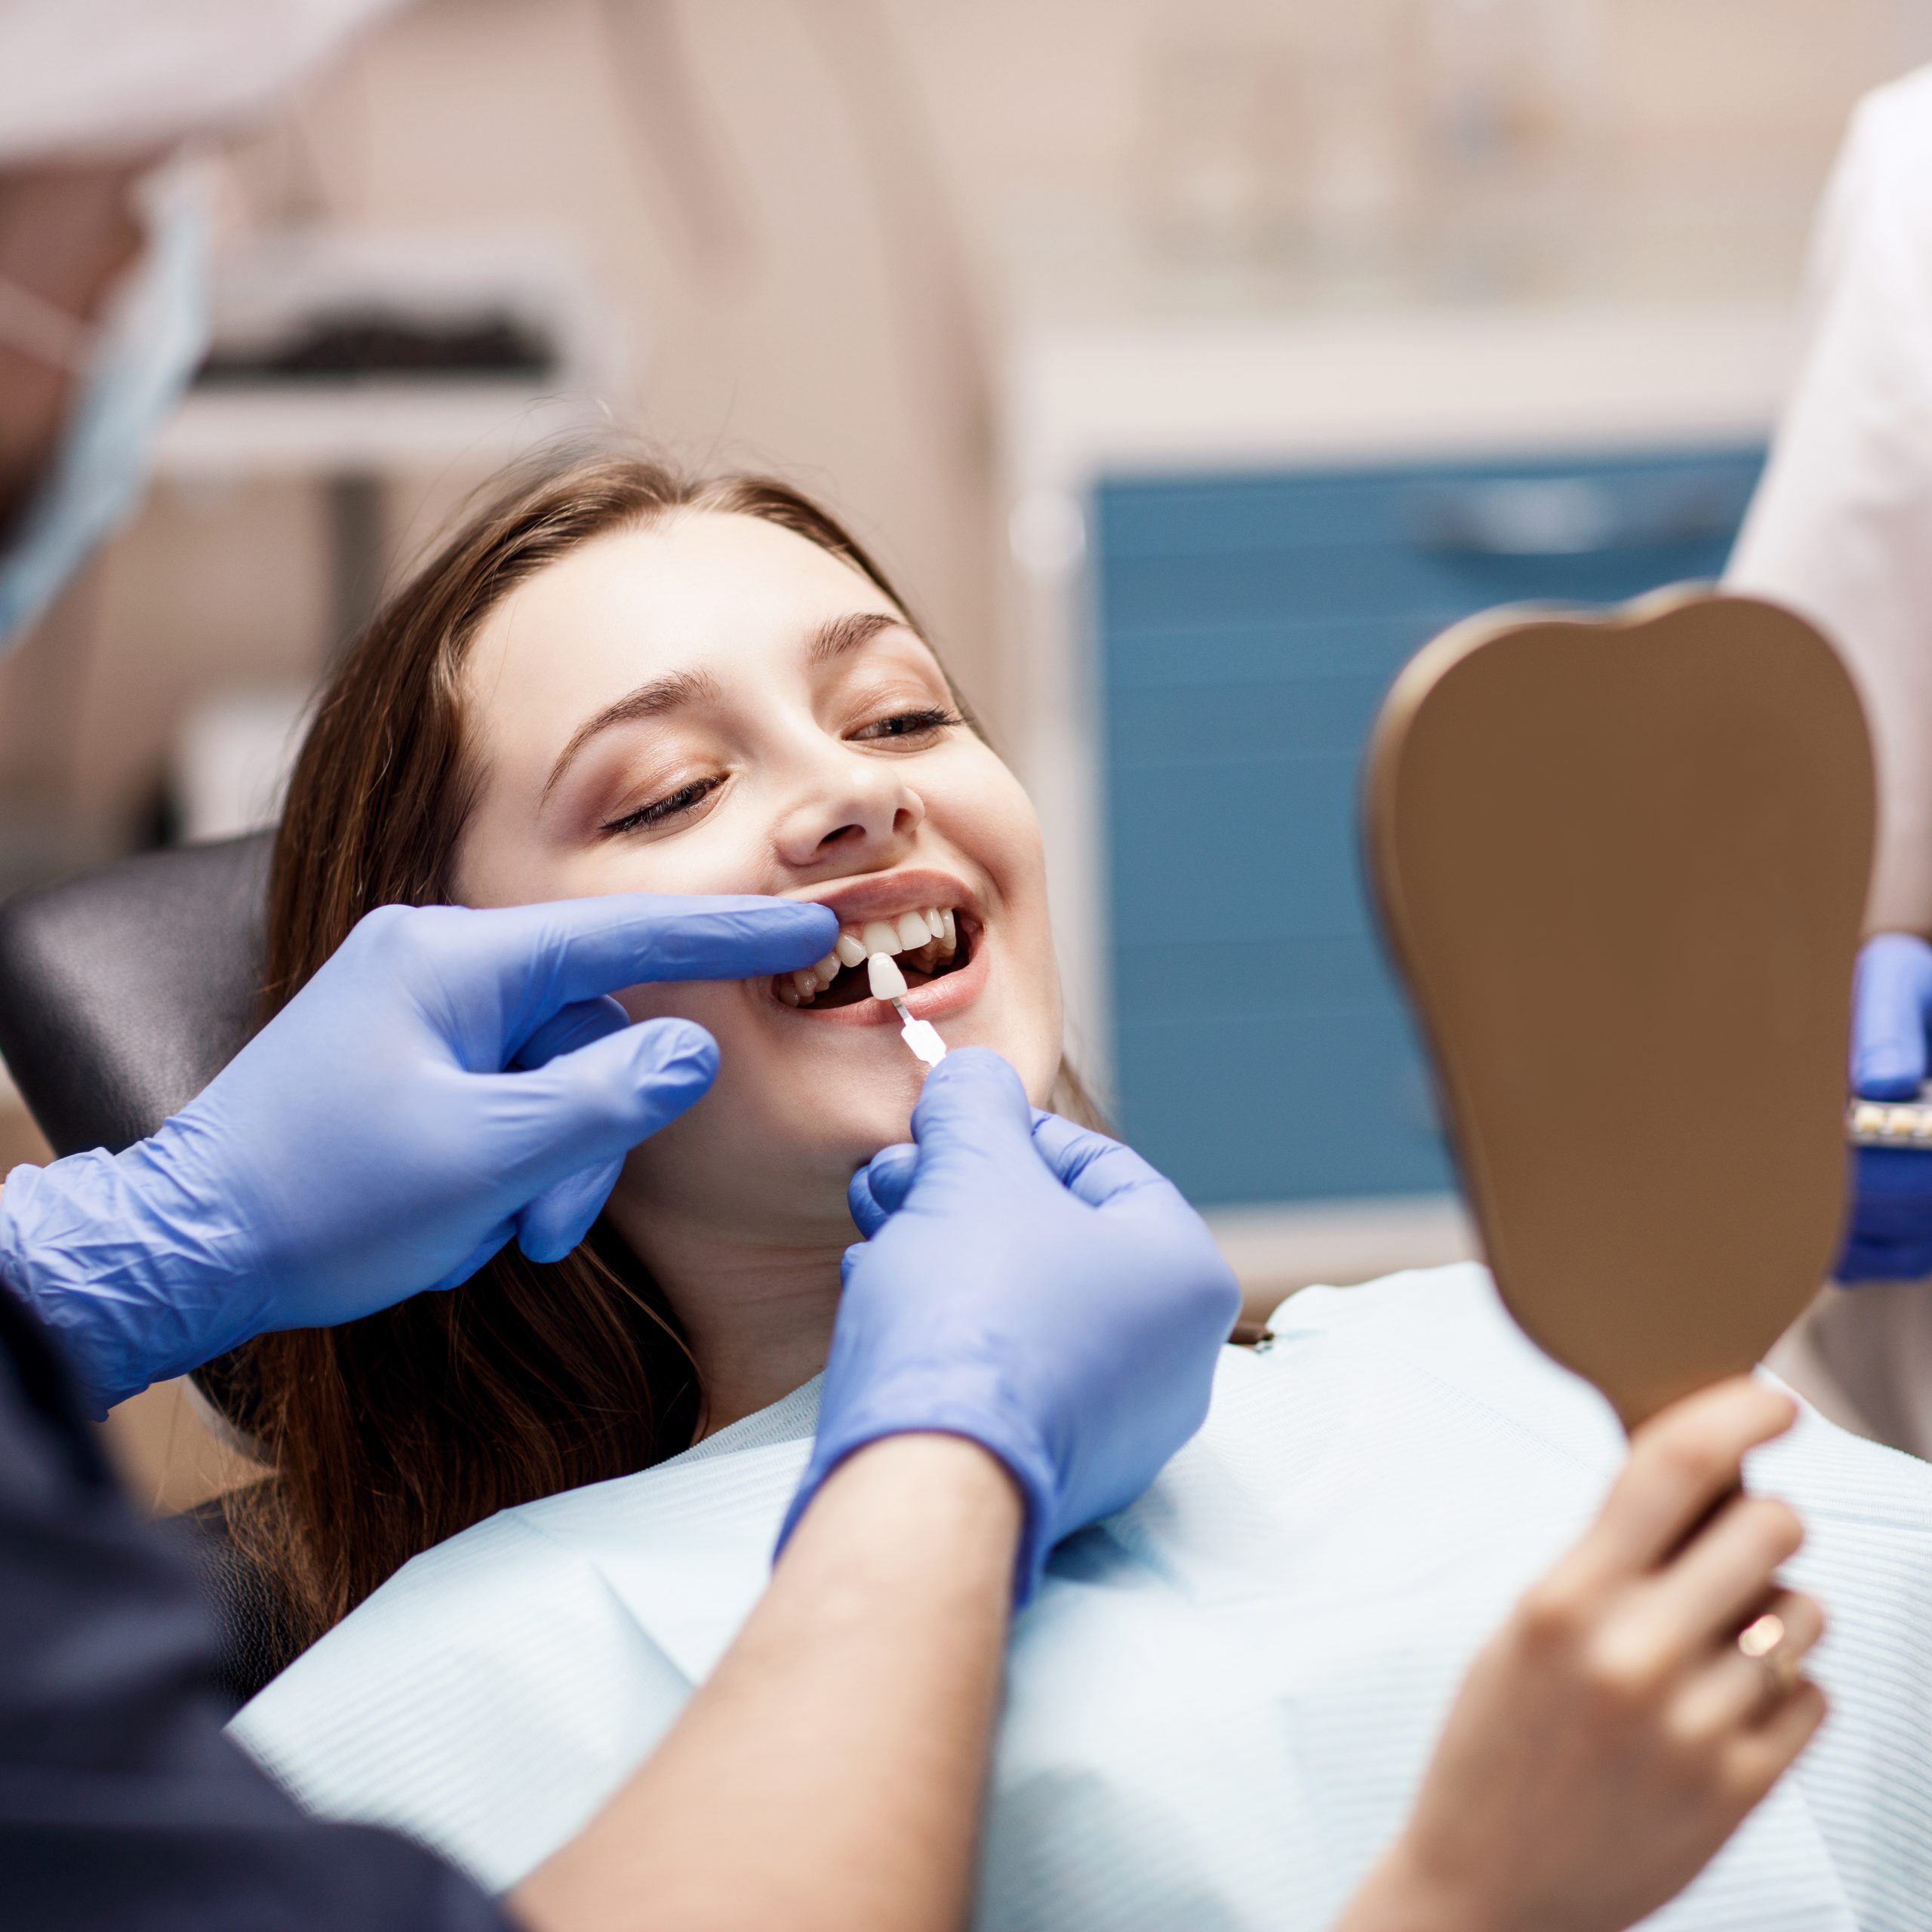 Woman looking in a dental chair looking at a handheld mirror while a dentist holds an artificial tooth to her mouth for color comparison.